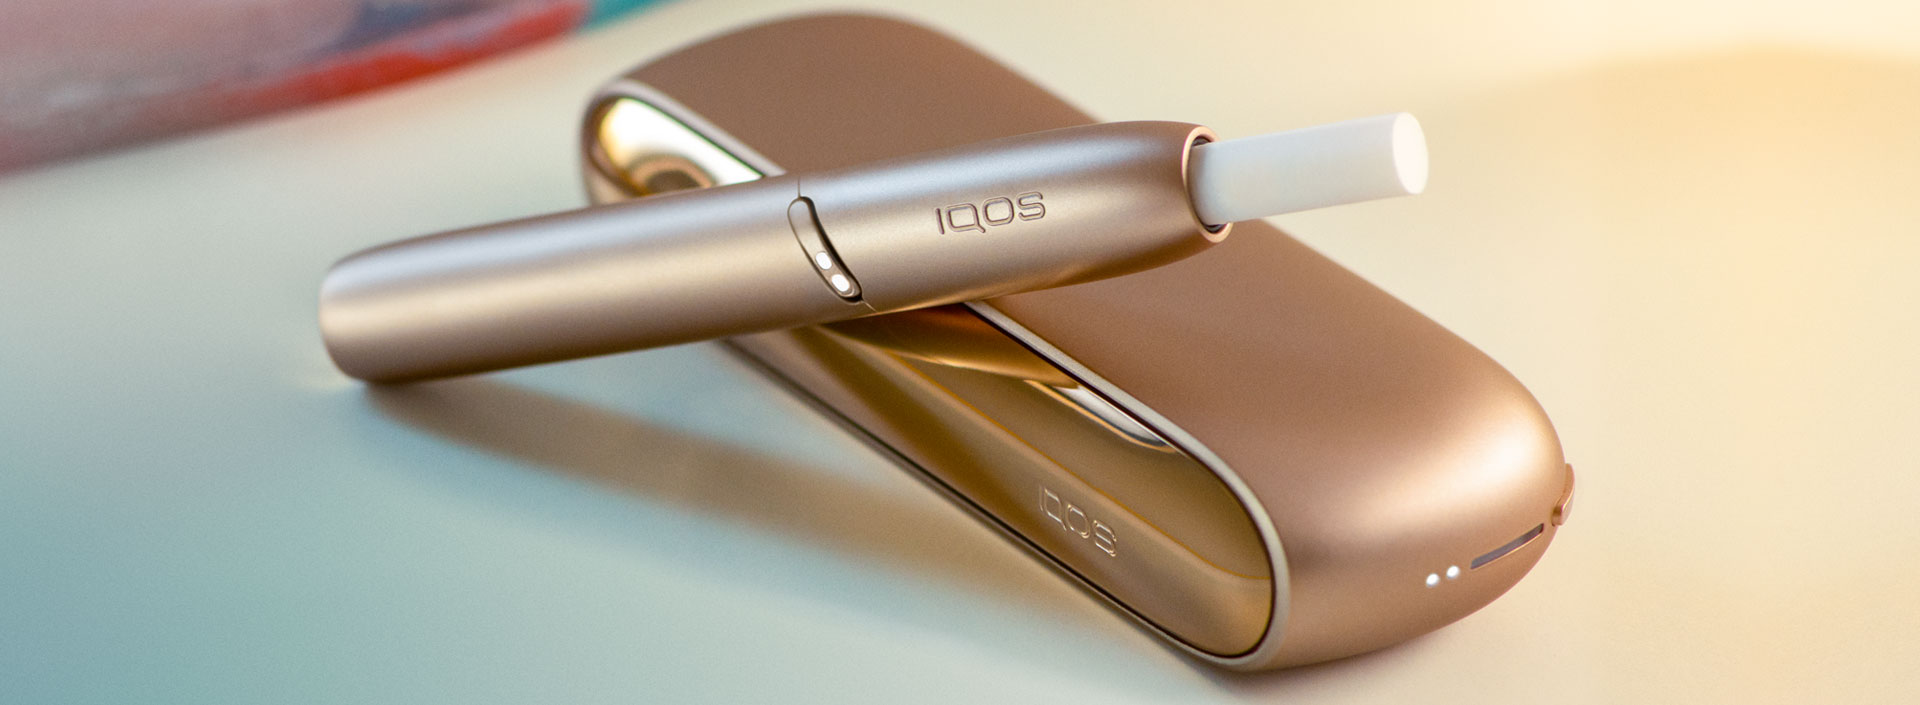 Is IQOS a Cigarette?